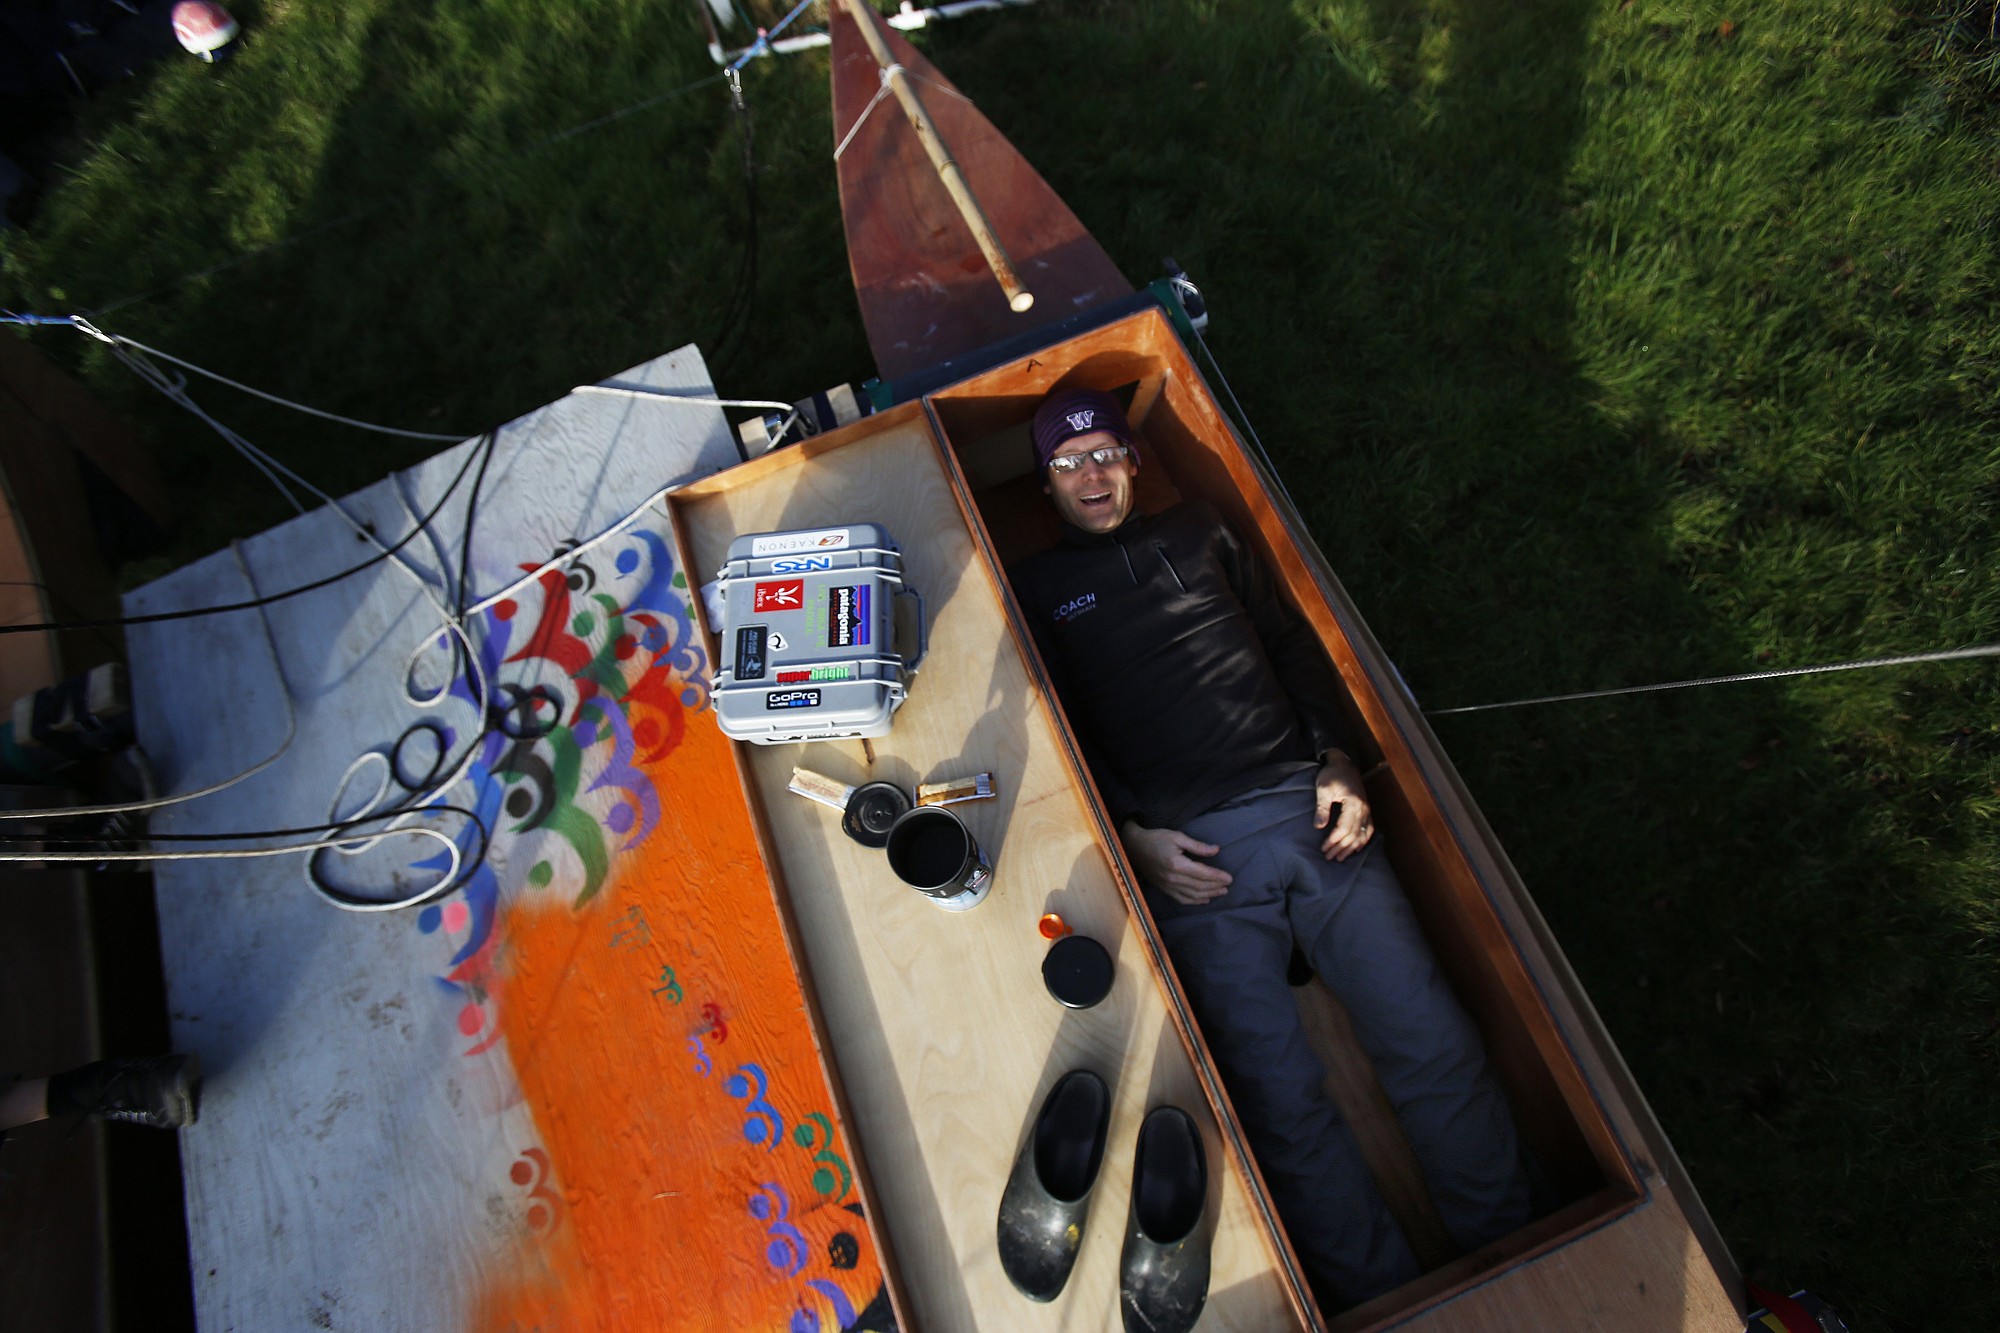 Scott Veirs tests what will be his sleeping space in one of the hulls of a 17-foot catamaran in Seattle.